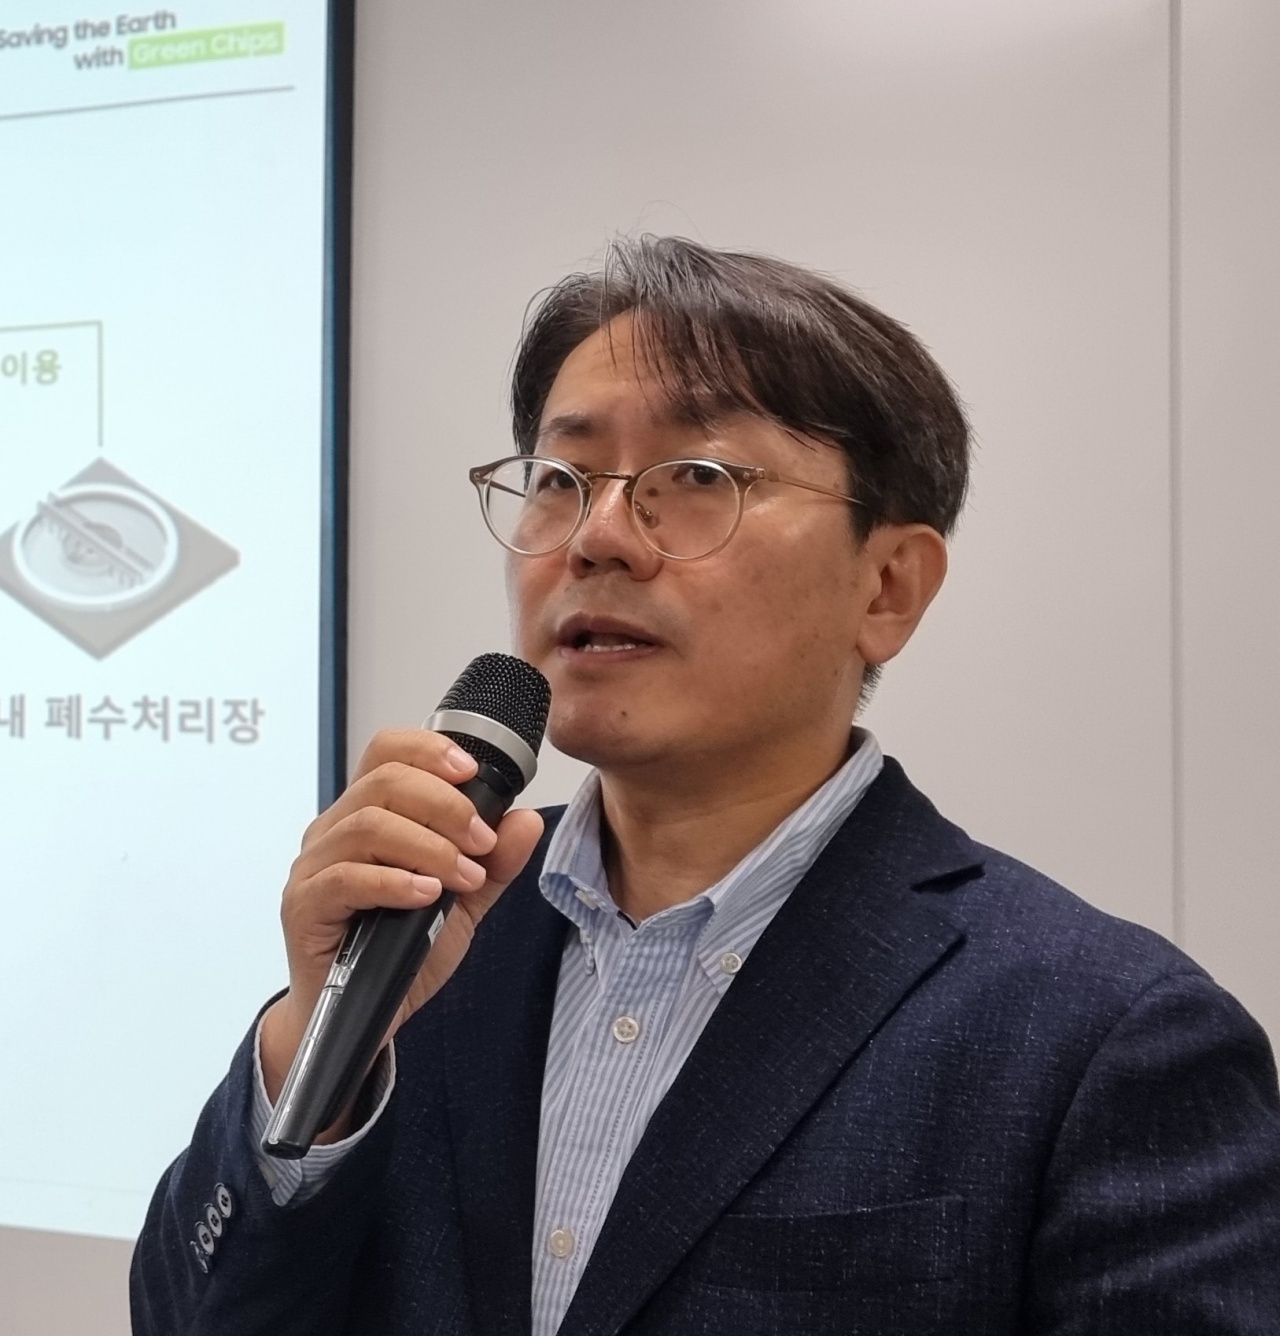 Song Doo-guen, executive vice president and head of the Environment ＆ Safety Center at Samsung Electronics, speaks at a briefing in Seoul, Friday. (Samsung Electronics)